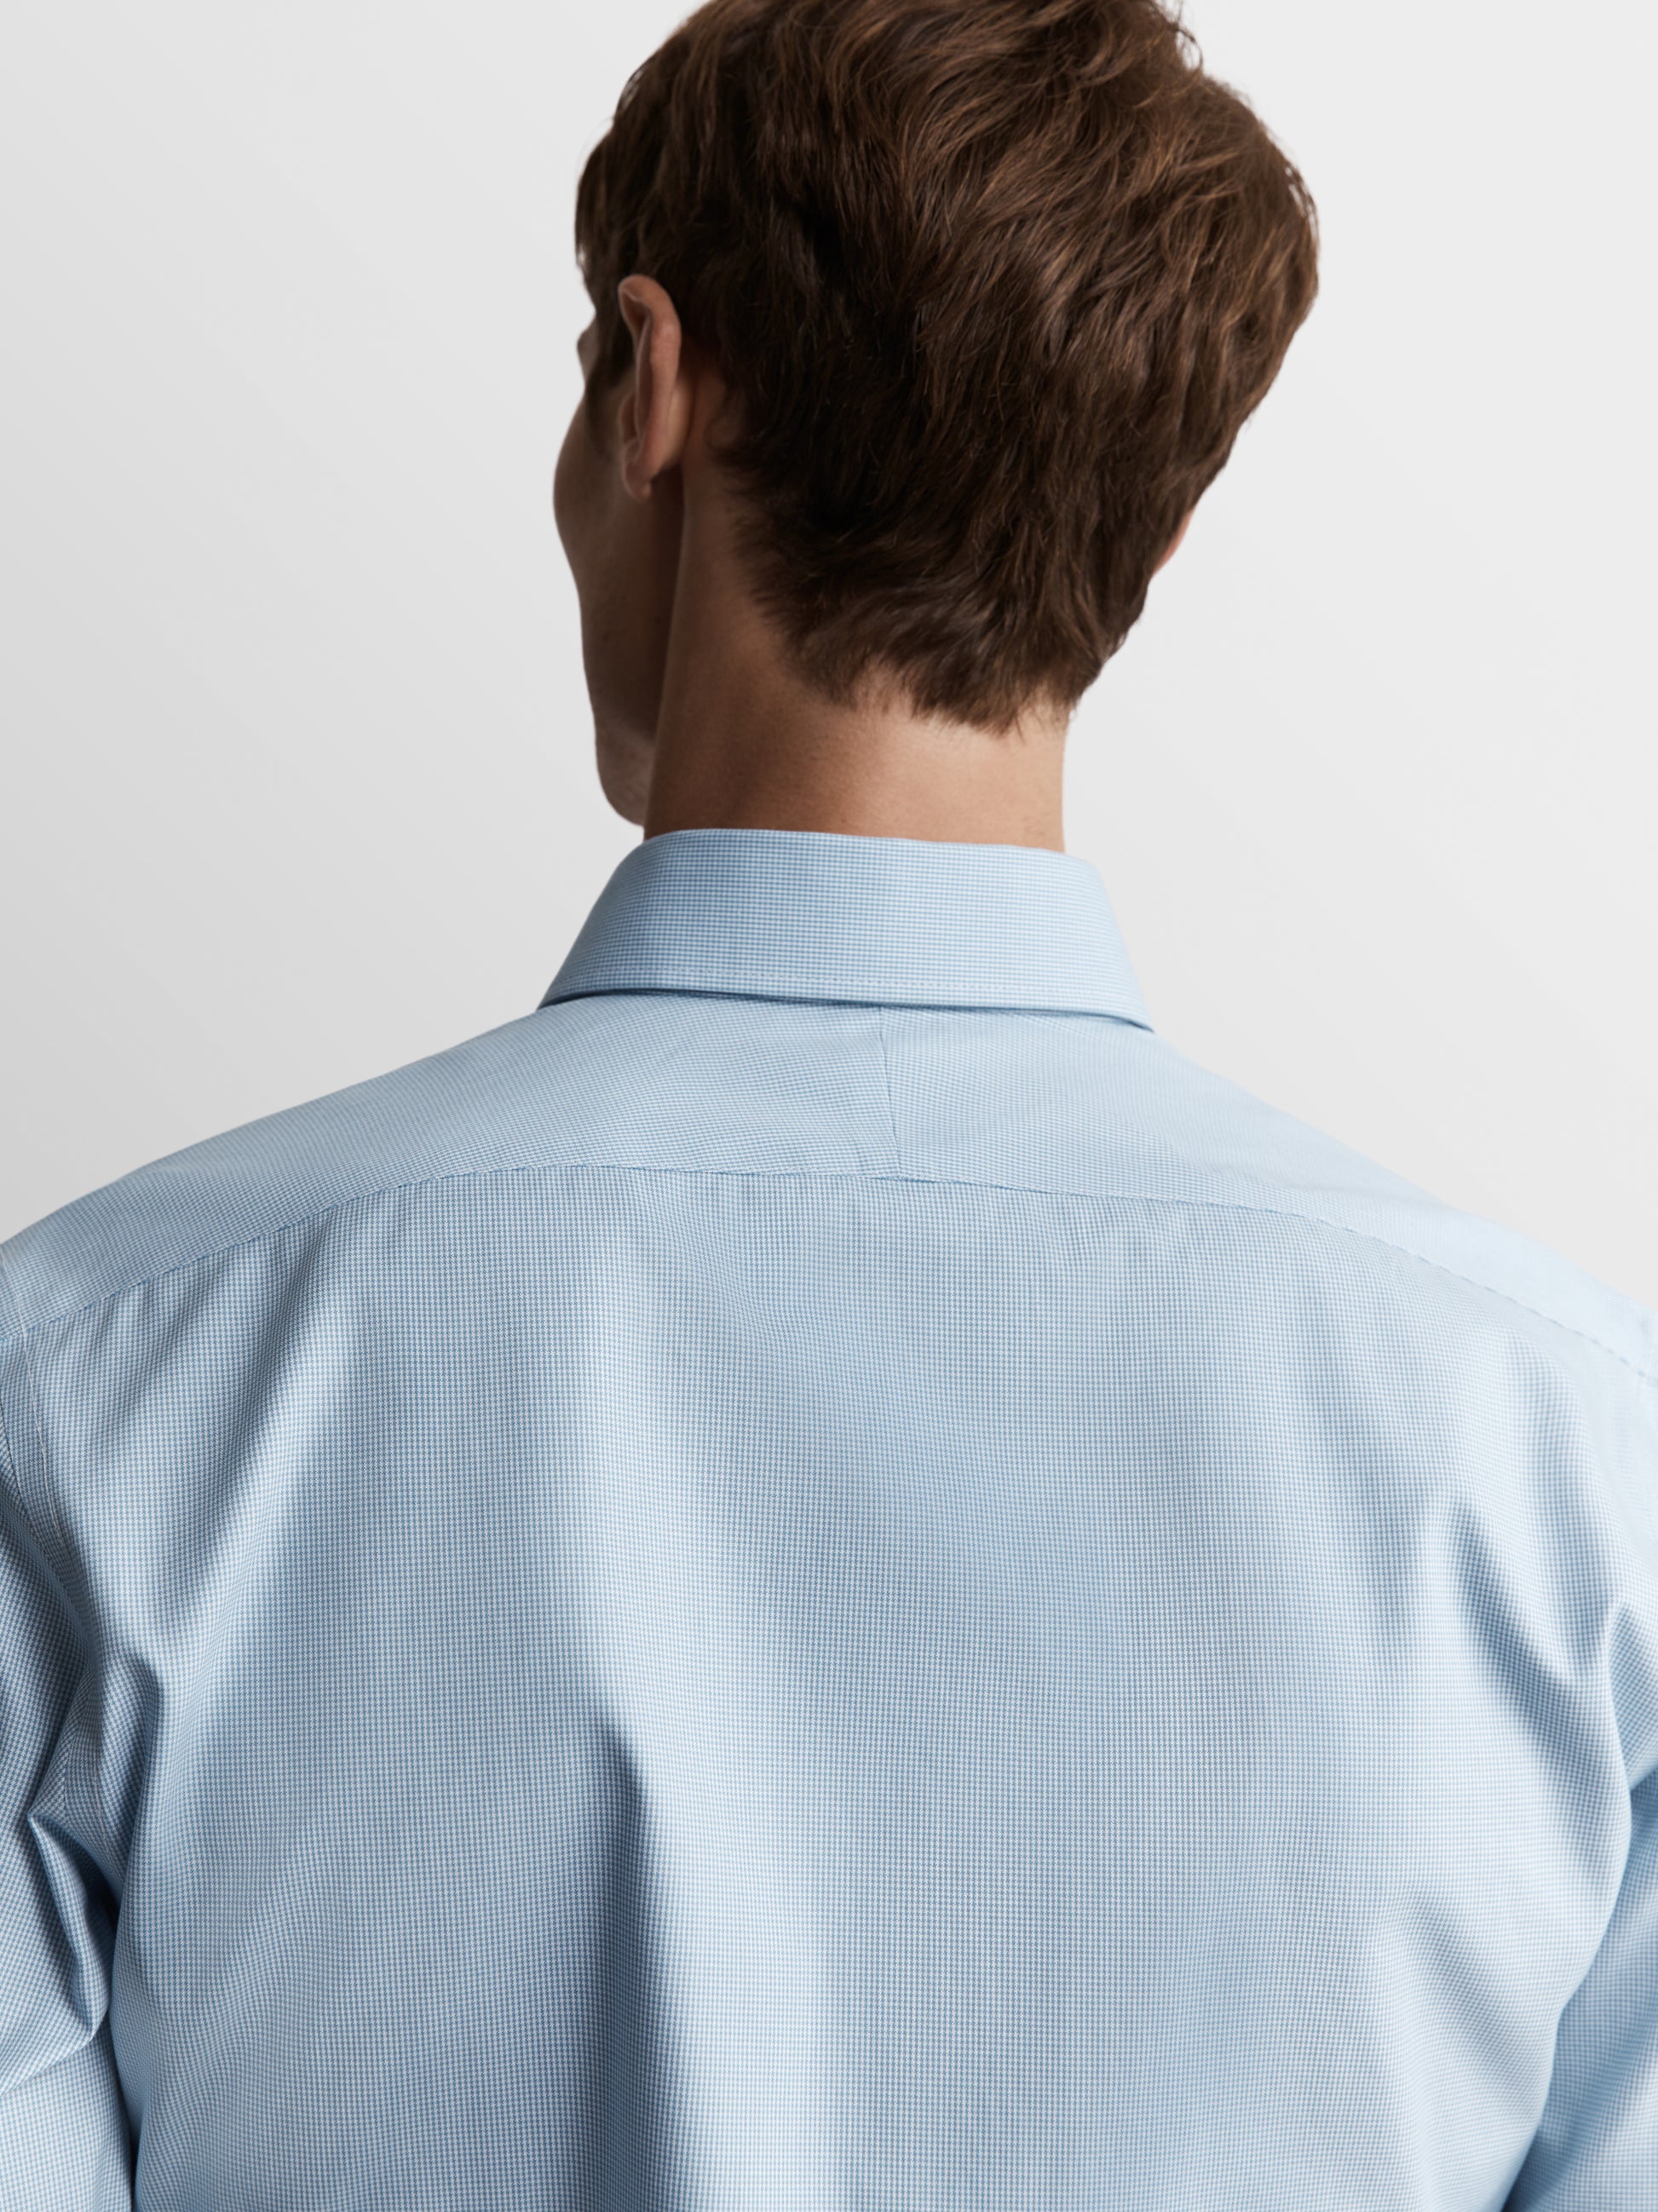 Image 3 of Non-Iron Blue Micro Dogtooth Plain Weave Fitted Single Cuff Semi Cutaway Collar Shirt